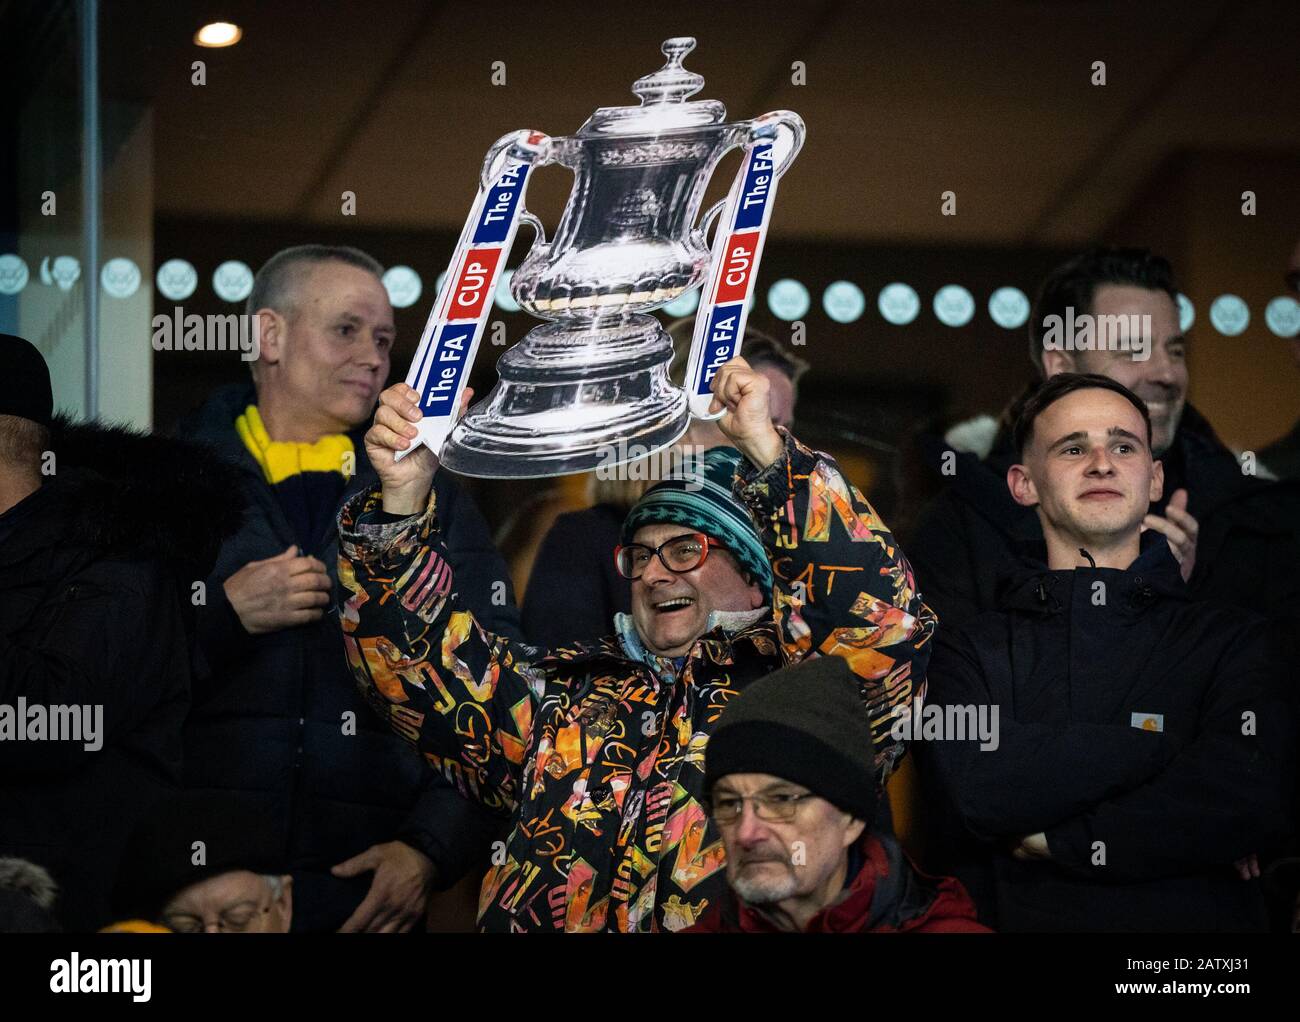 Oxford, UK. 04th Feb, 2020. Oxford United supporter Timmy Mallett holds a FA Cup cutout during the FA Cup 4th round replay match between Oxford United and Newcastle United at the Kassam Stadium, Oxford, England on 4 February 2020. Photo by Andy Rowland. Credit: PRiME Media Images/Alamy Live News Stock Photo